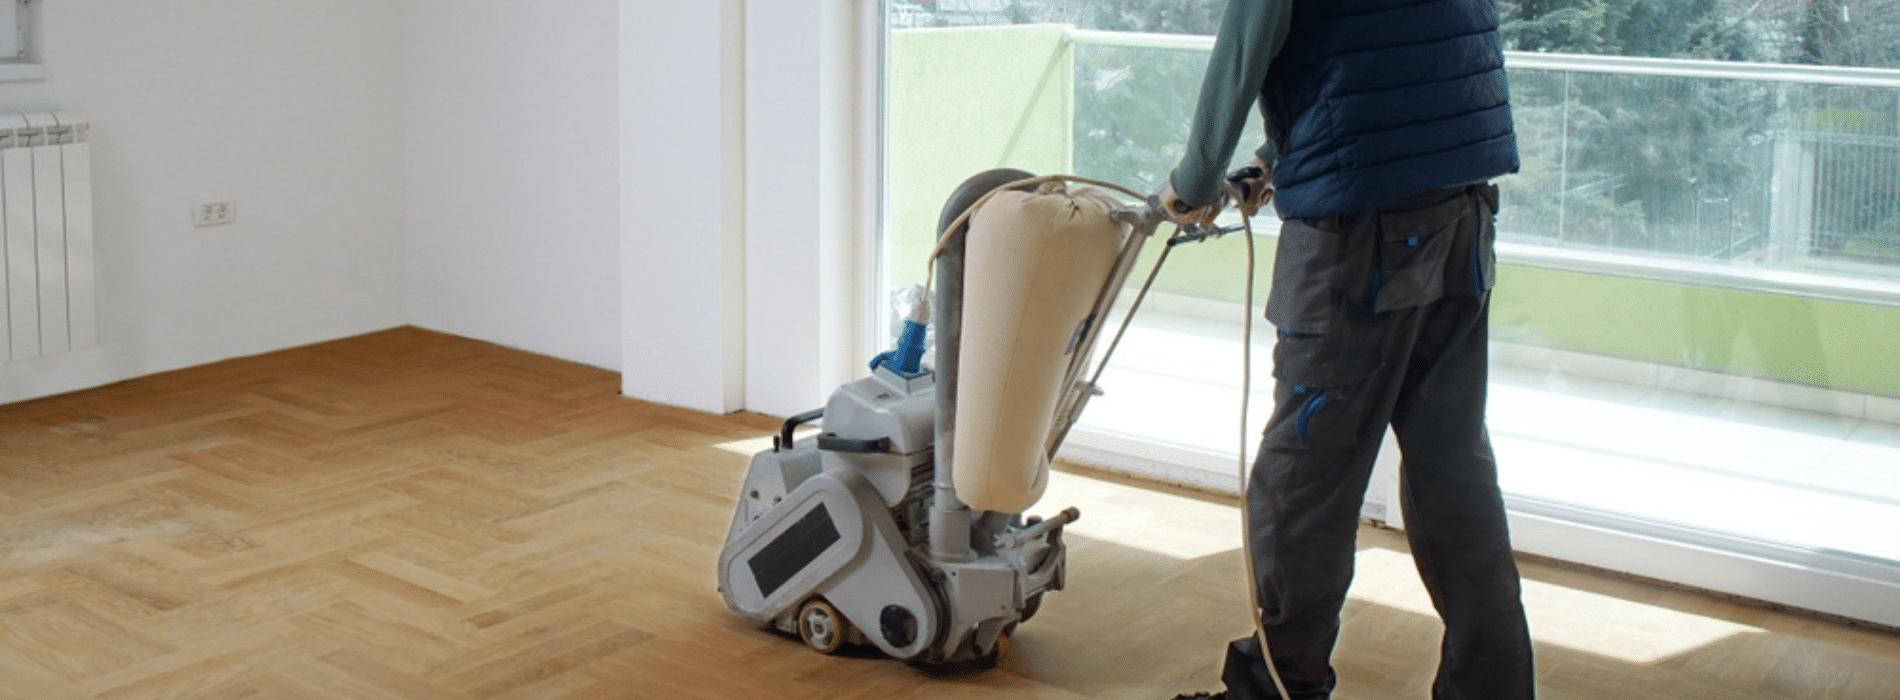 In Poplar, E14, Mr Sander® meticulously sanding a herringbone floor using an Effect 2200 (230V, 50-60Hz) Bona belt sander. The 250x750 mm sander, connected to a HEPA-filtered dust extraction system, ensures a clean and efficient result for a flawless finish.